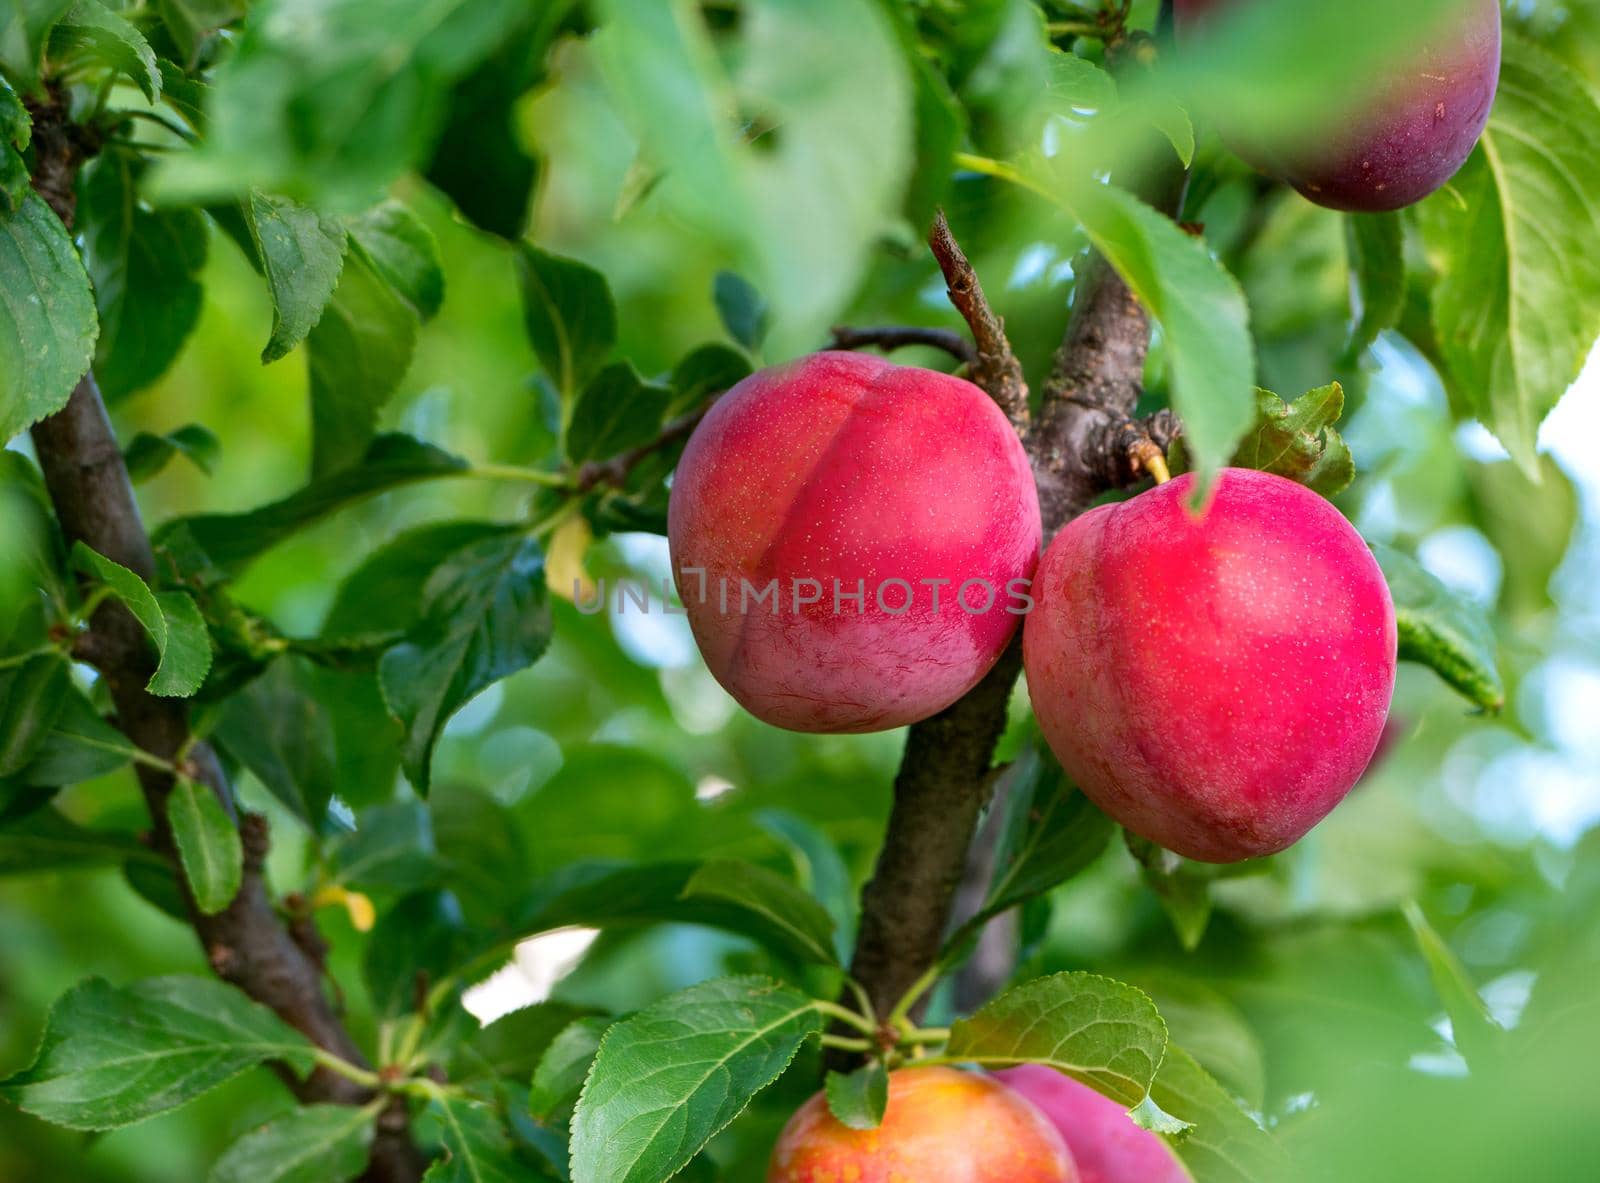 Red plums grow on a tree in the garden in the summer